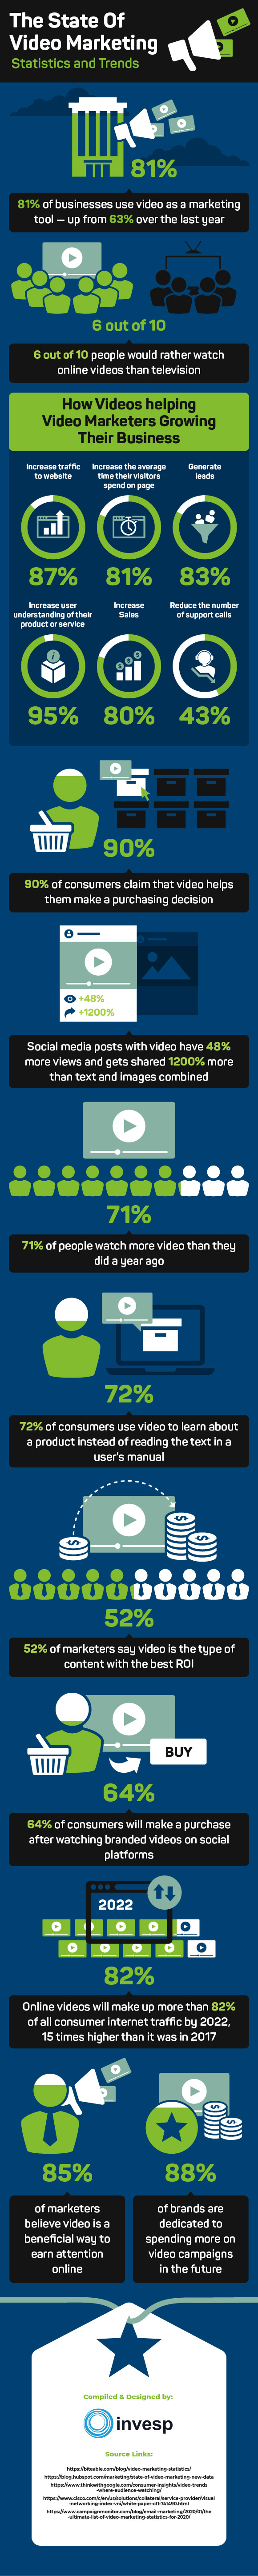 The State of video marketing